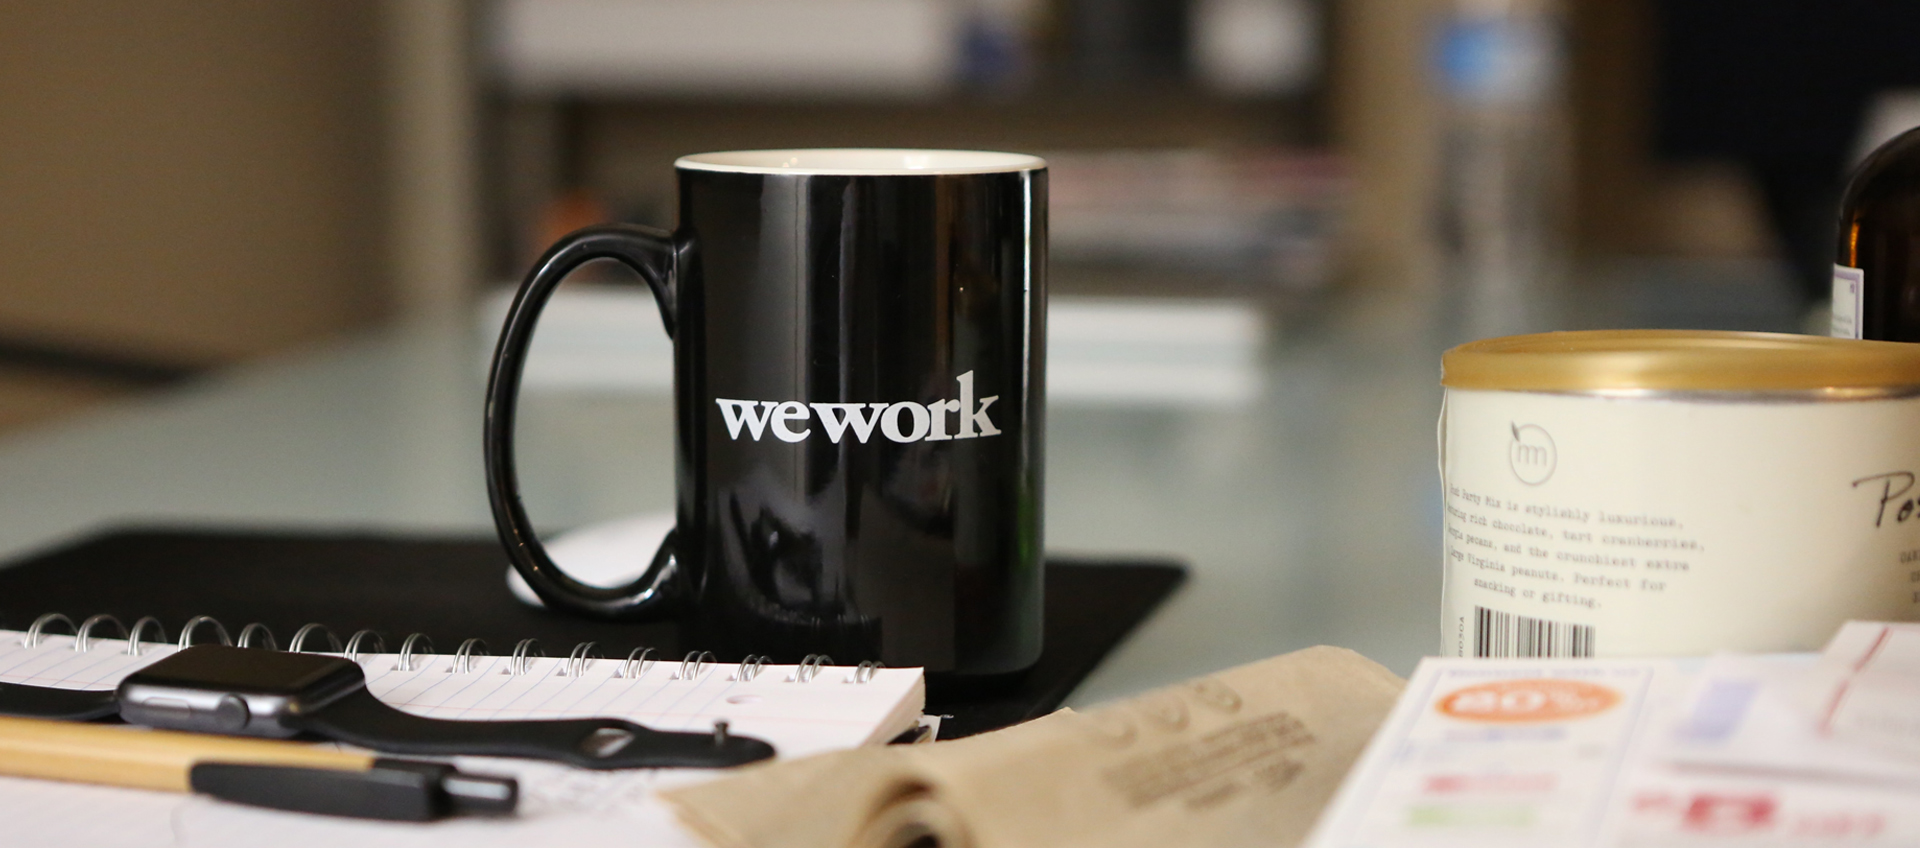 WeWork is teetering after its proposed IPO was abandoned.